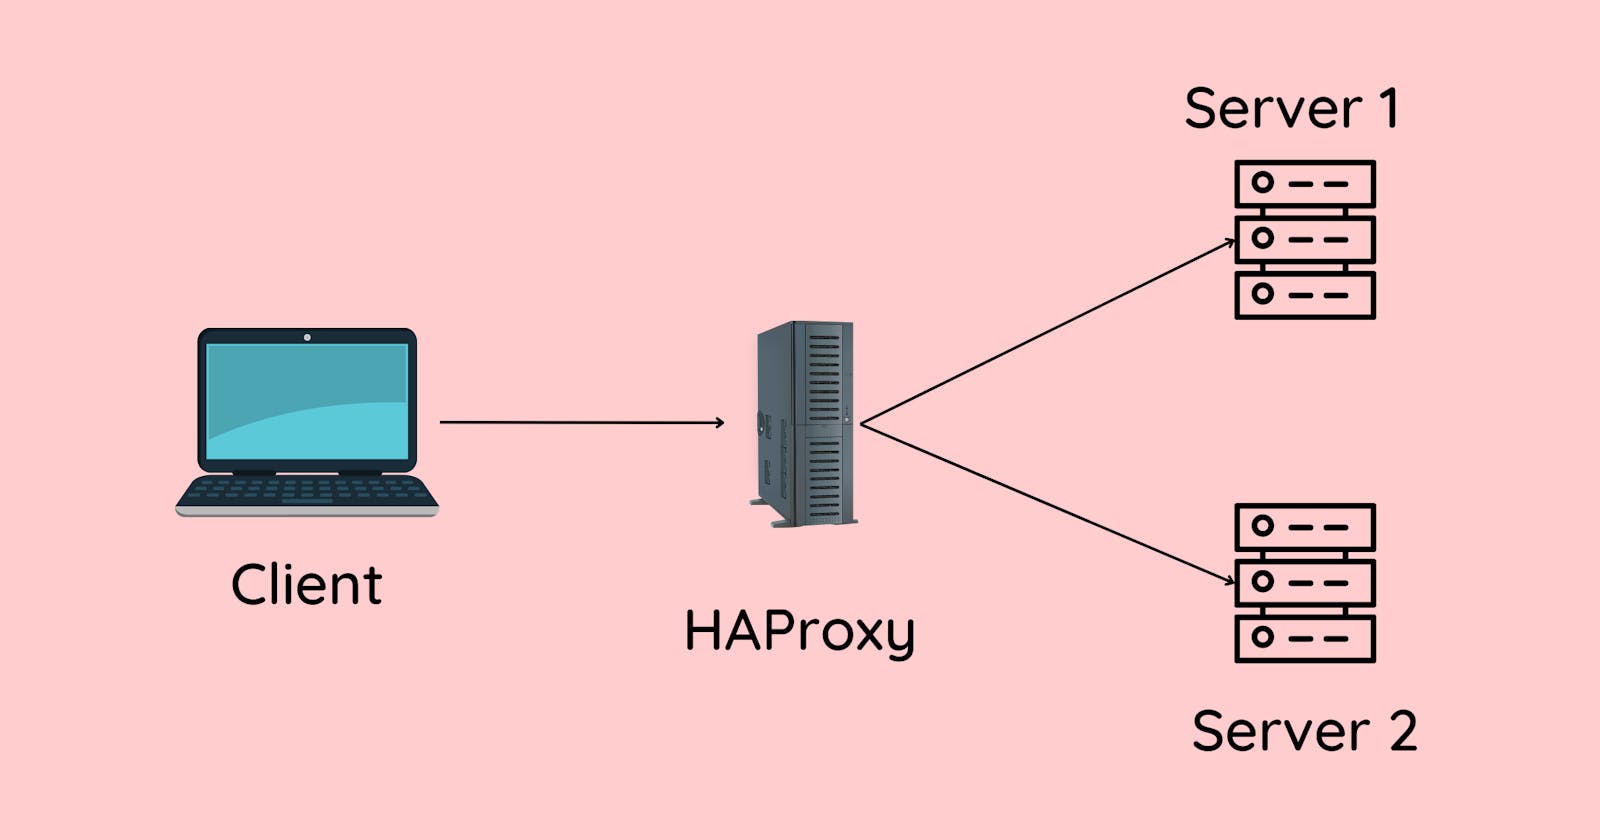 Step-by-Step Guide to Installing and Configuring HAProxy on Ubuntu